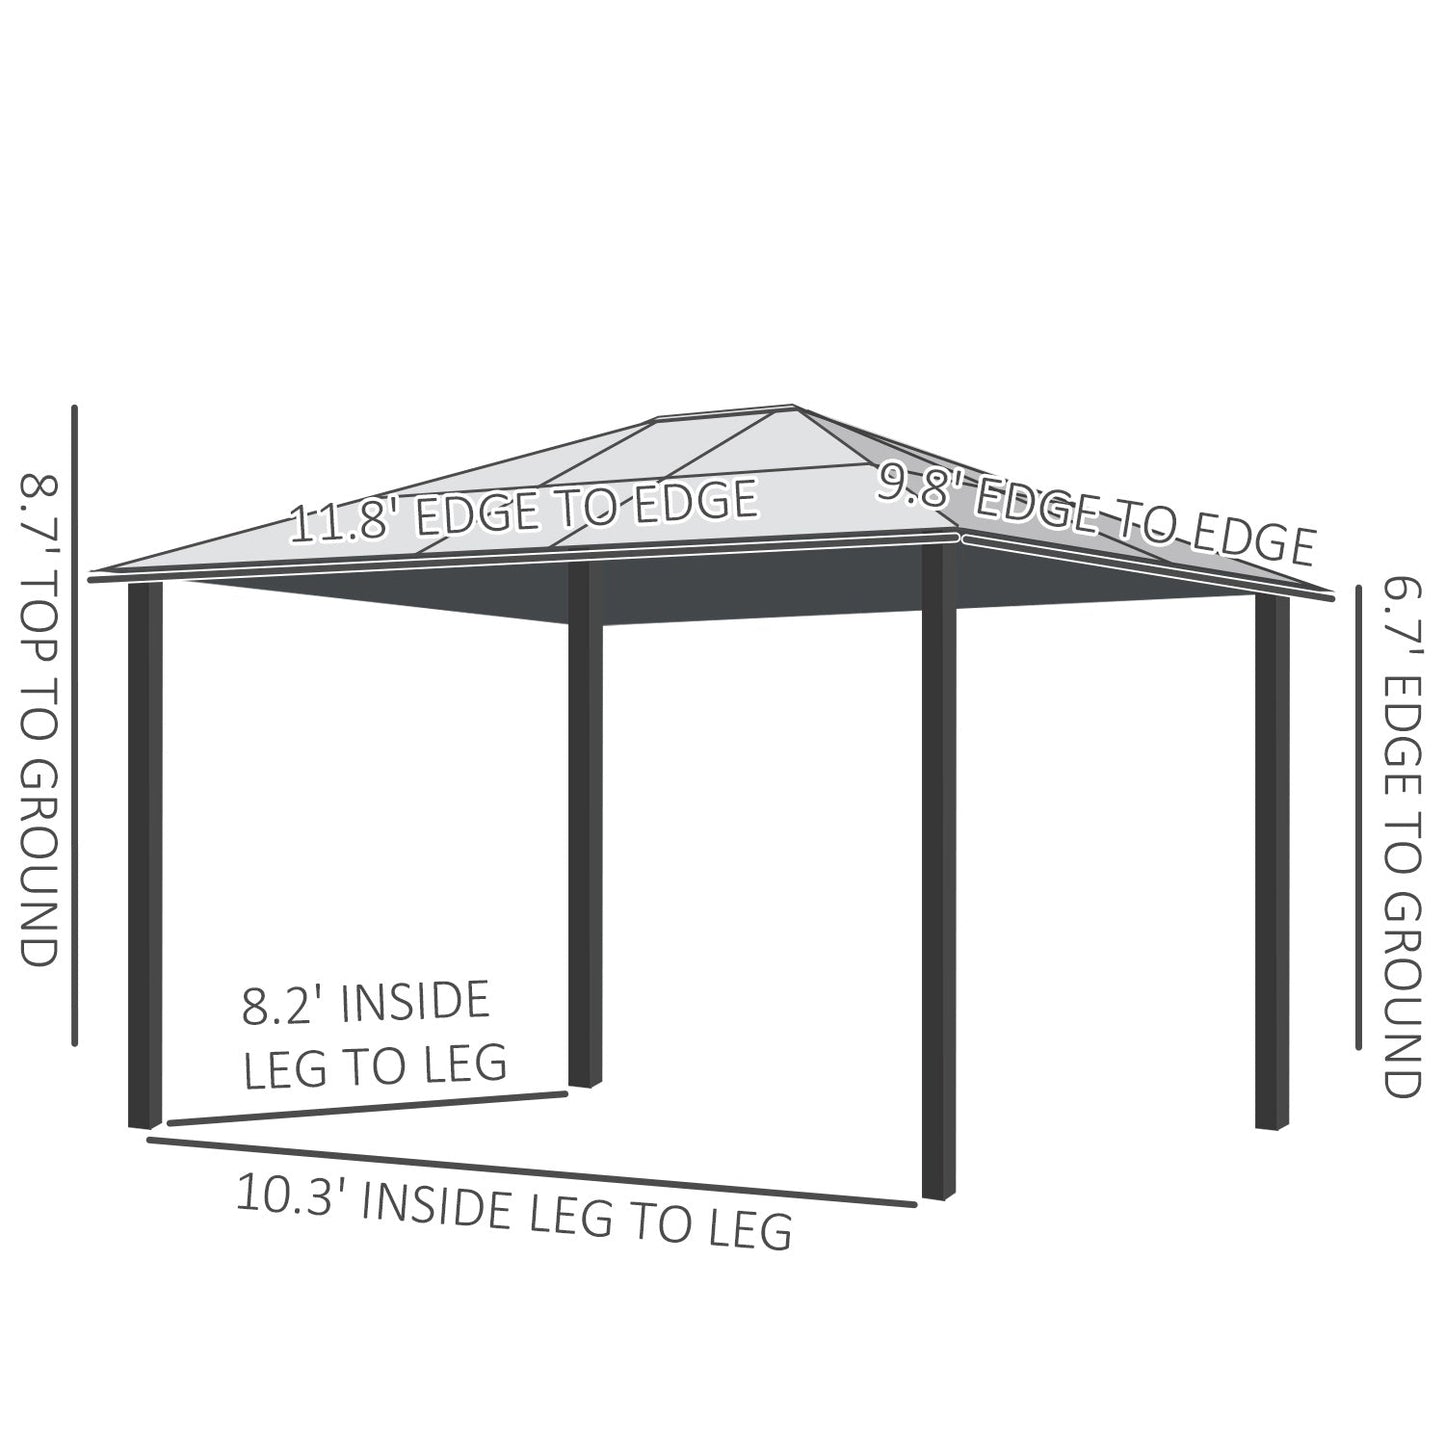 Outdoor and Garden-Patio Gazebo Canopy 12' x 10' Hardtop Luxury Gazebo with Curtains - Outdoor Style Company